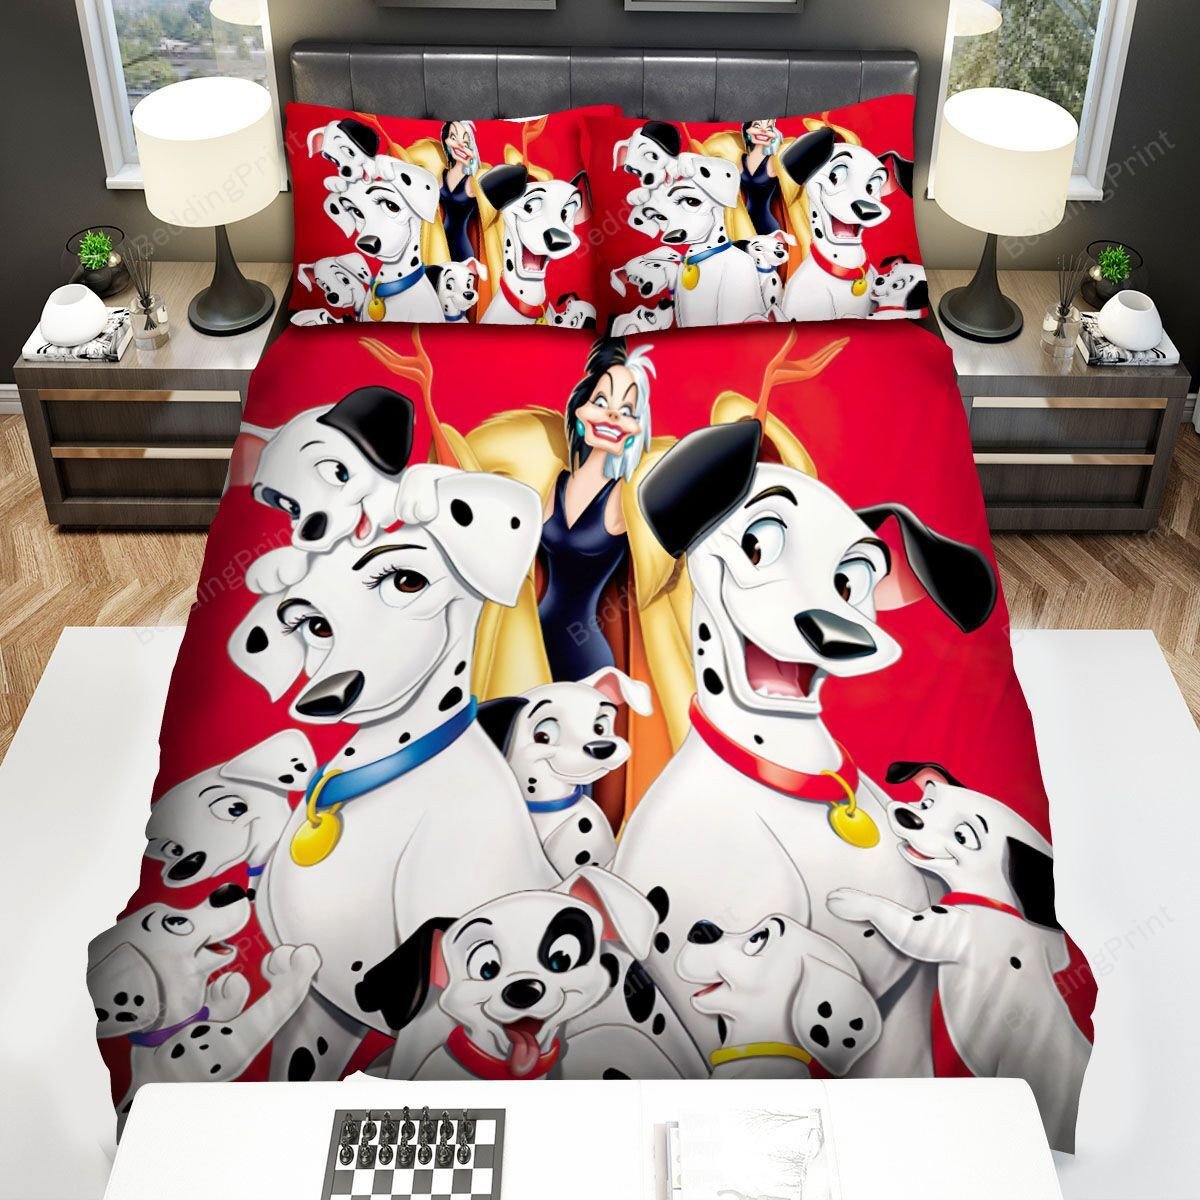 101 Dalmatians Movie Poster Bed Sheets Duvet Cover Bedding Sets. PLEASE NOTE: This is a duvet cover, NOT a Comforter